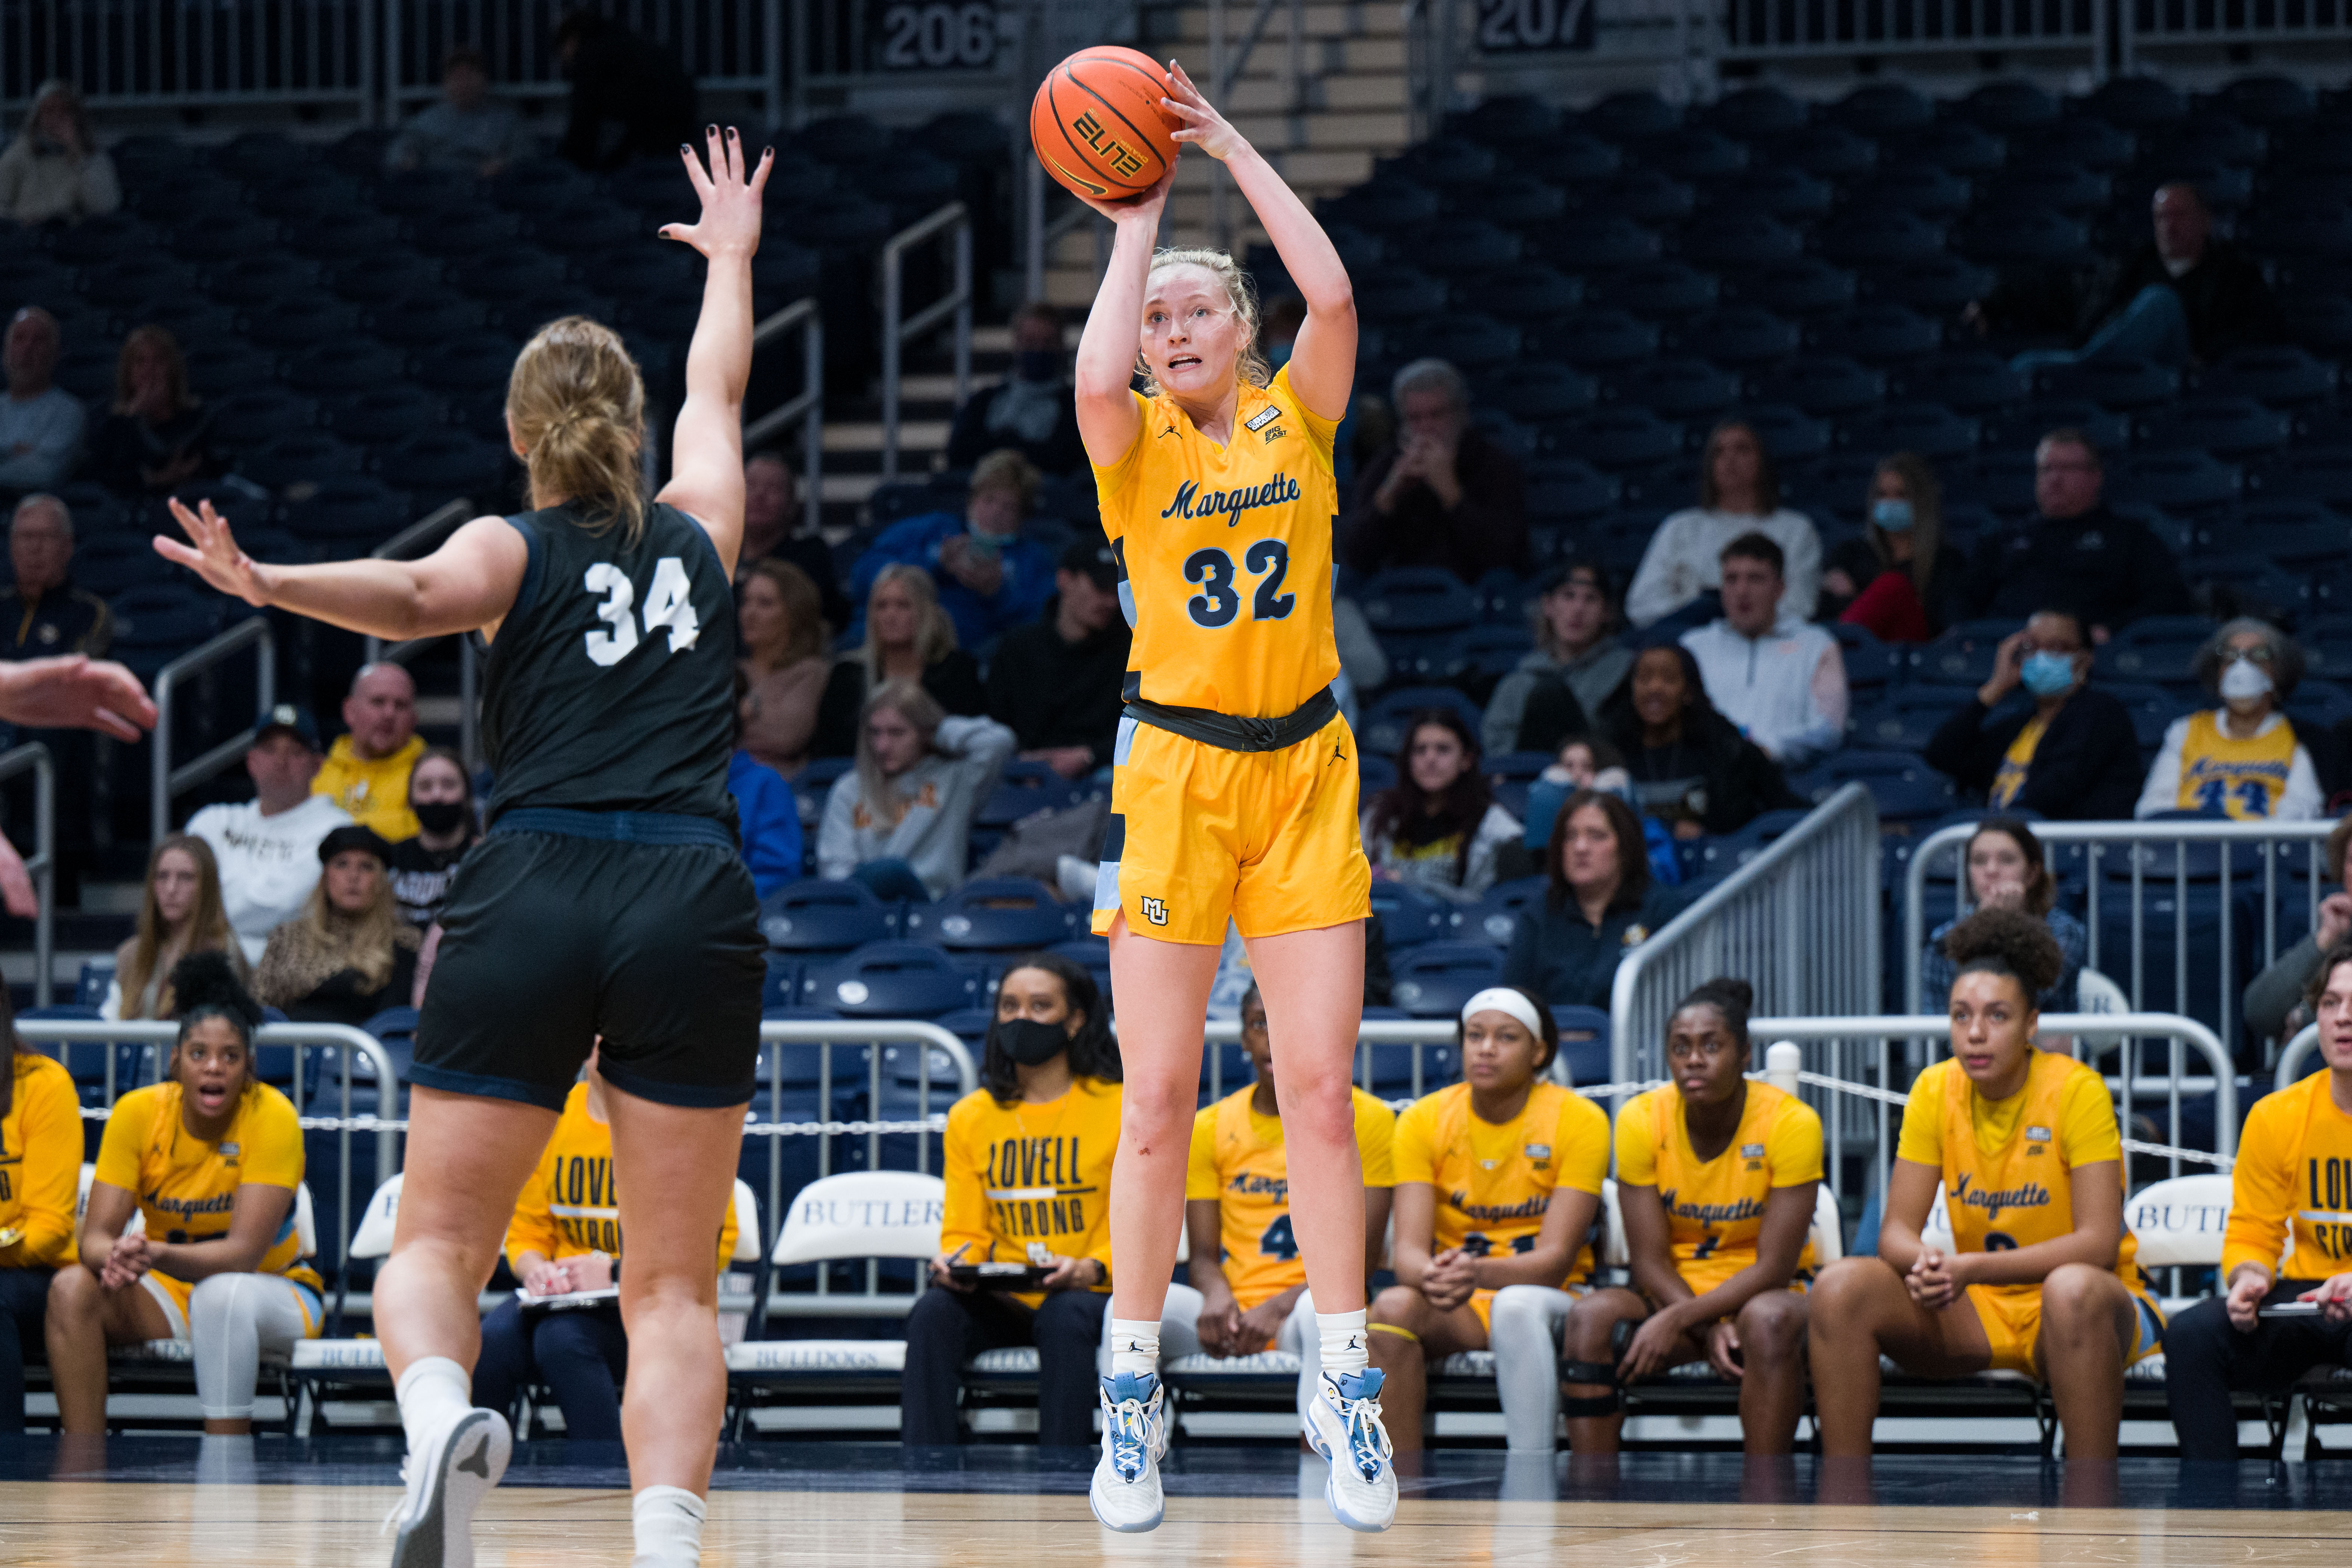 COLLEGE BASKETBALL: JAN 23 Womens - Marquette at Butler